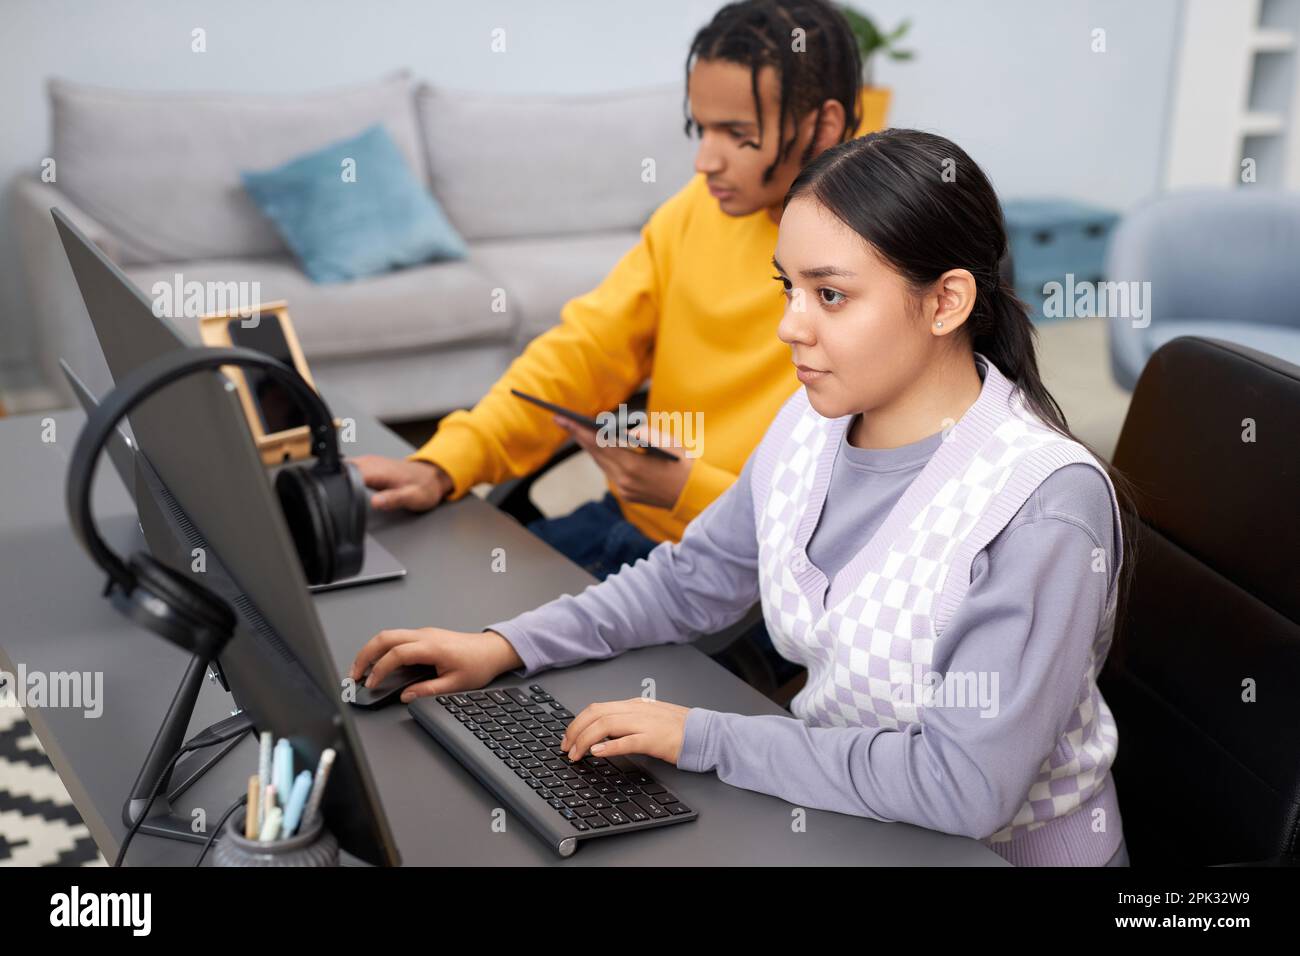 High angle view of two young people writing code in office with focus on multiethnic woman in foreground Stock Photo